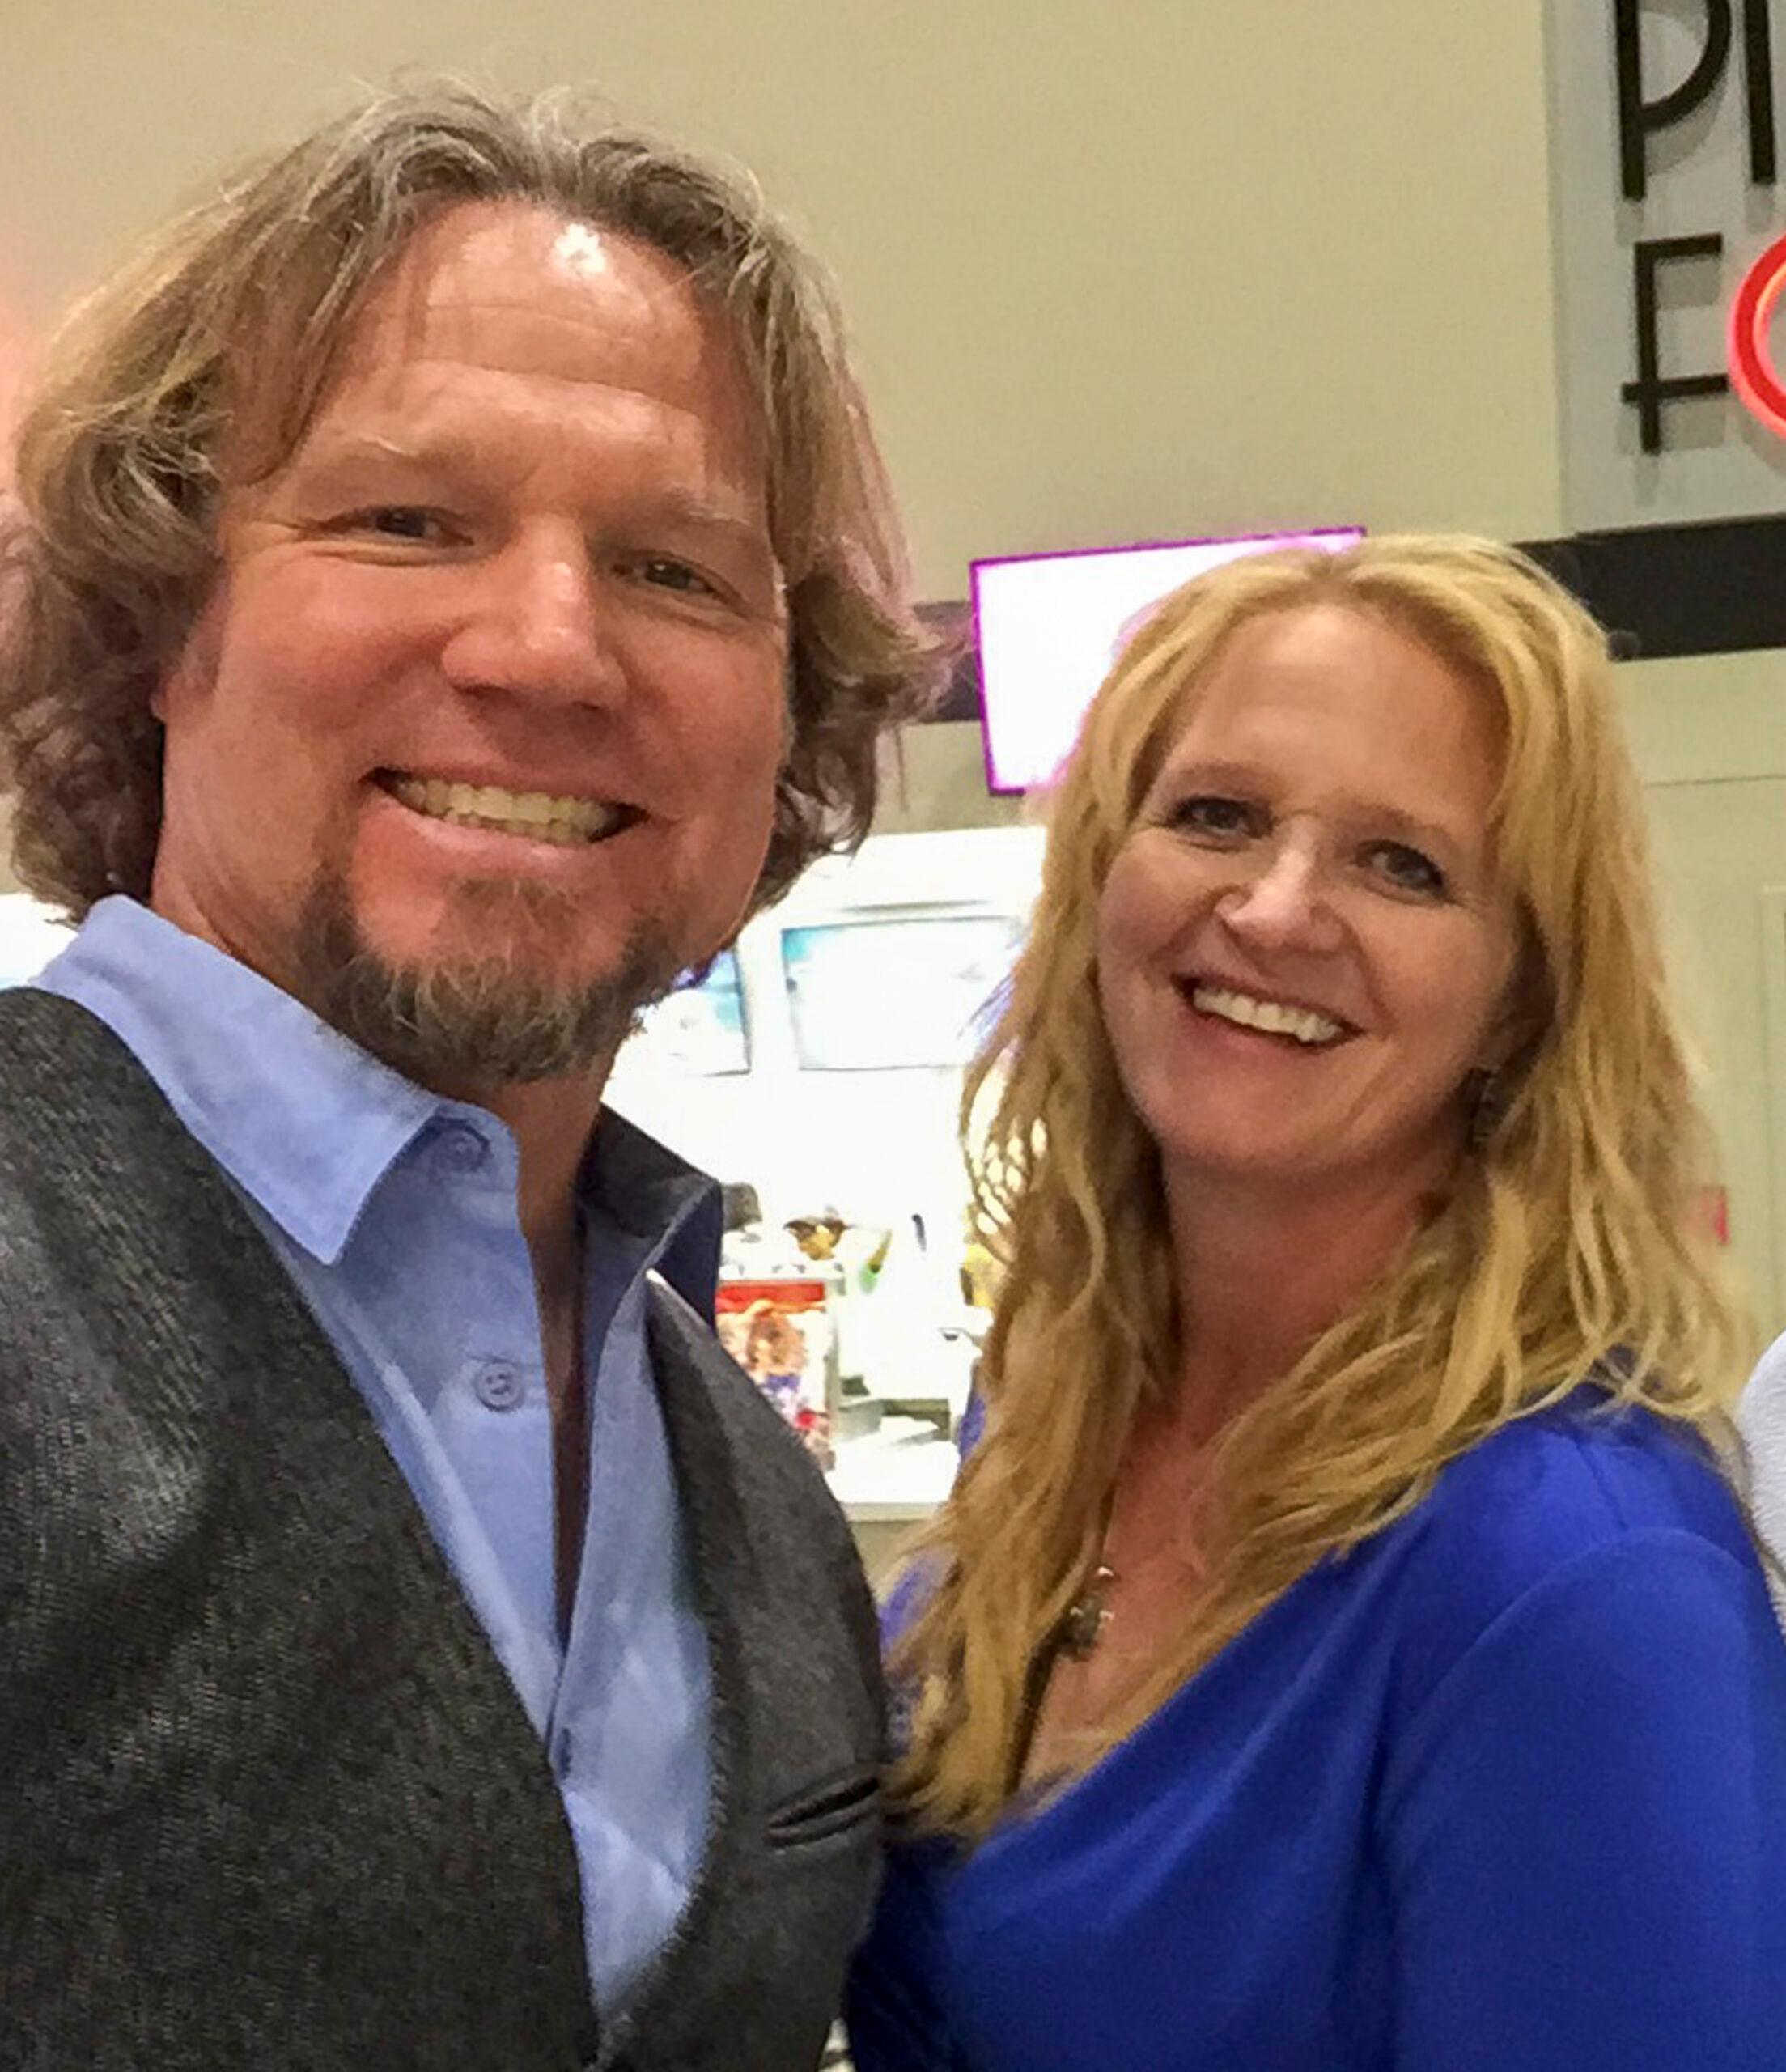 Sisterwives' Kody and Christine Brown attend opening of T-Mobile arena